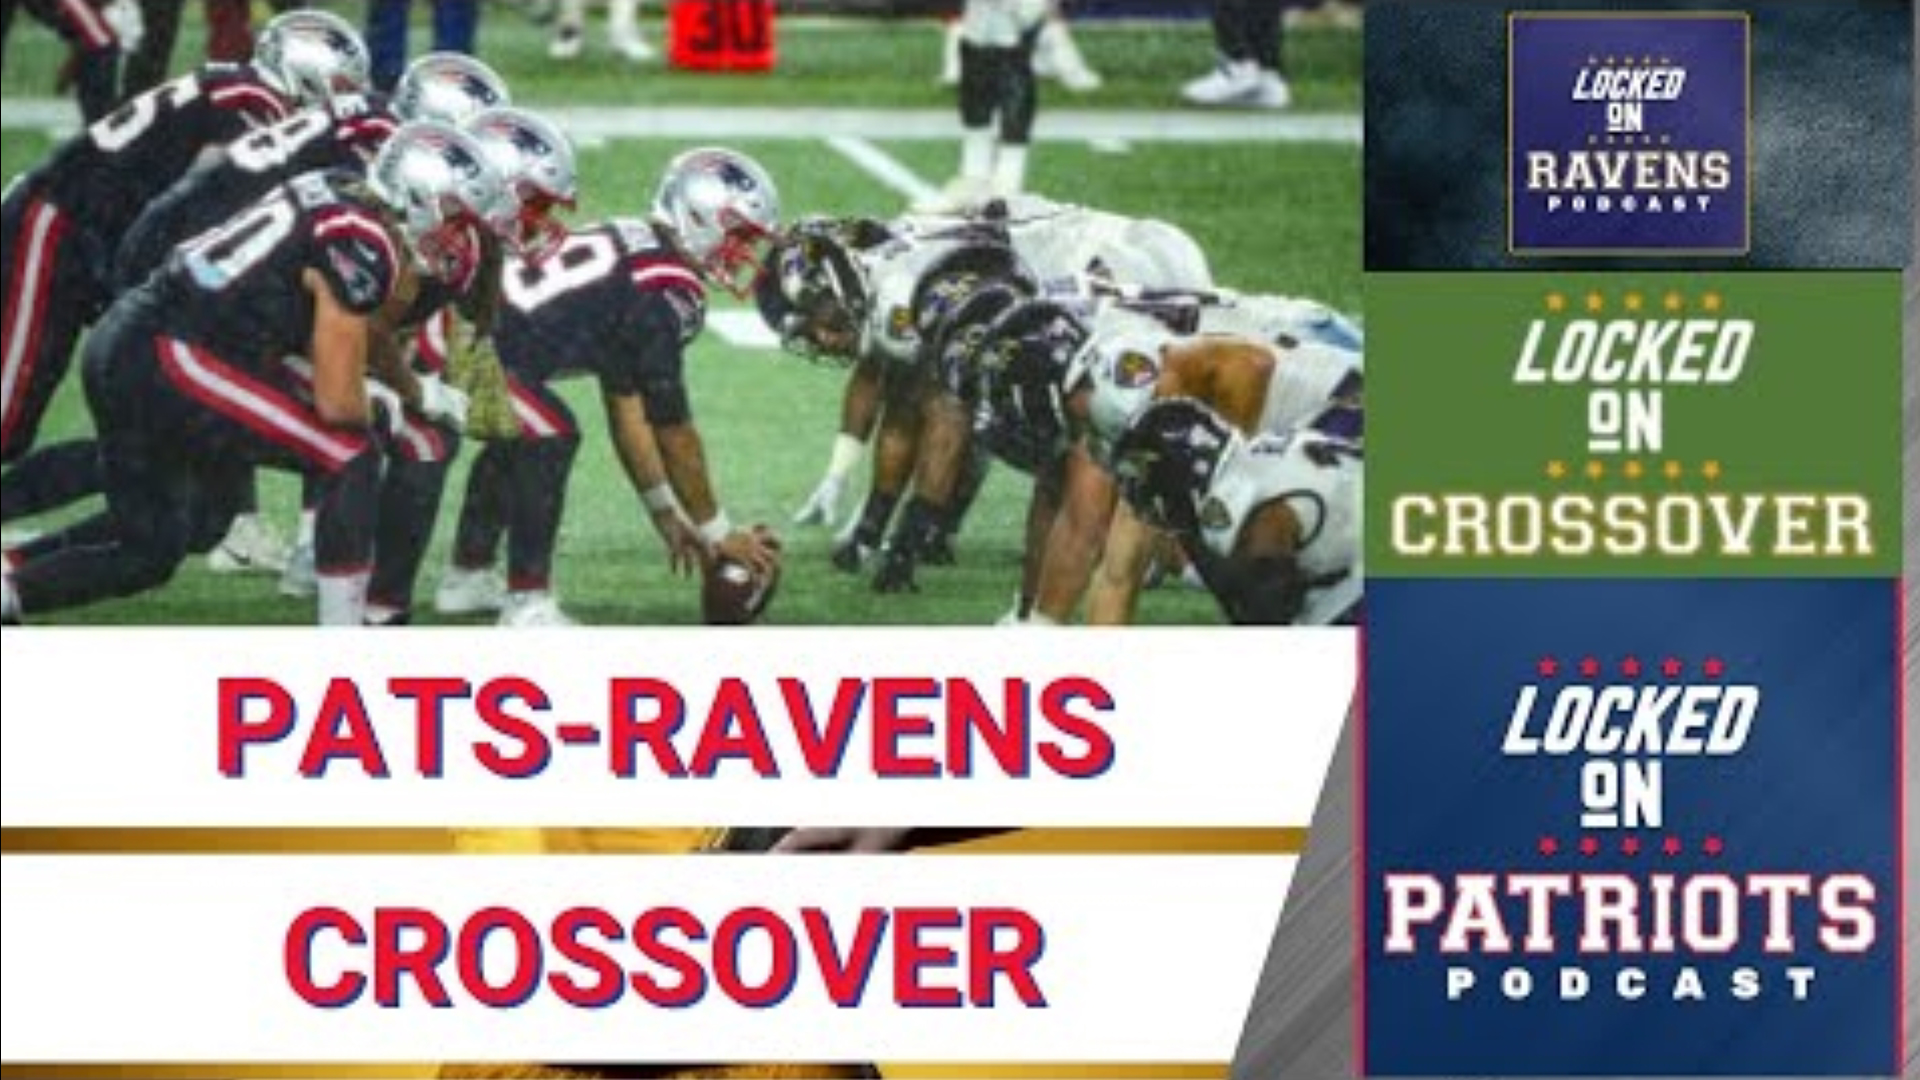 Join hosts Mike D’Abate of Locked On Patriots and Kevin Oestreicher of Locked On Ravens as they preview this Sunday’s showdown.